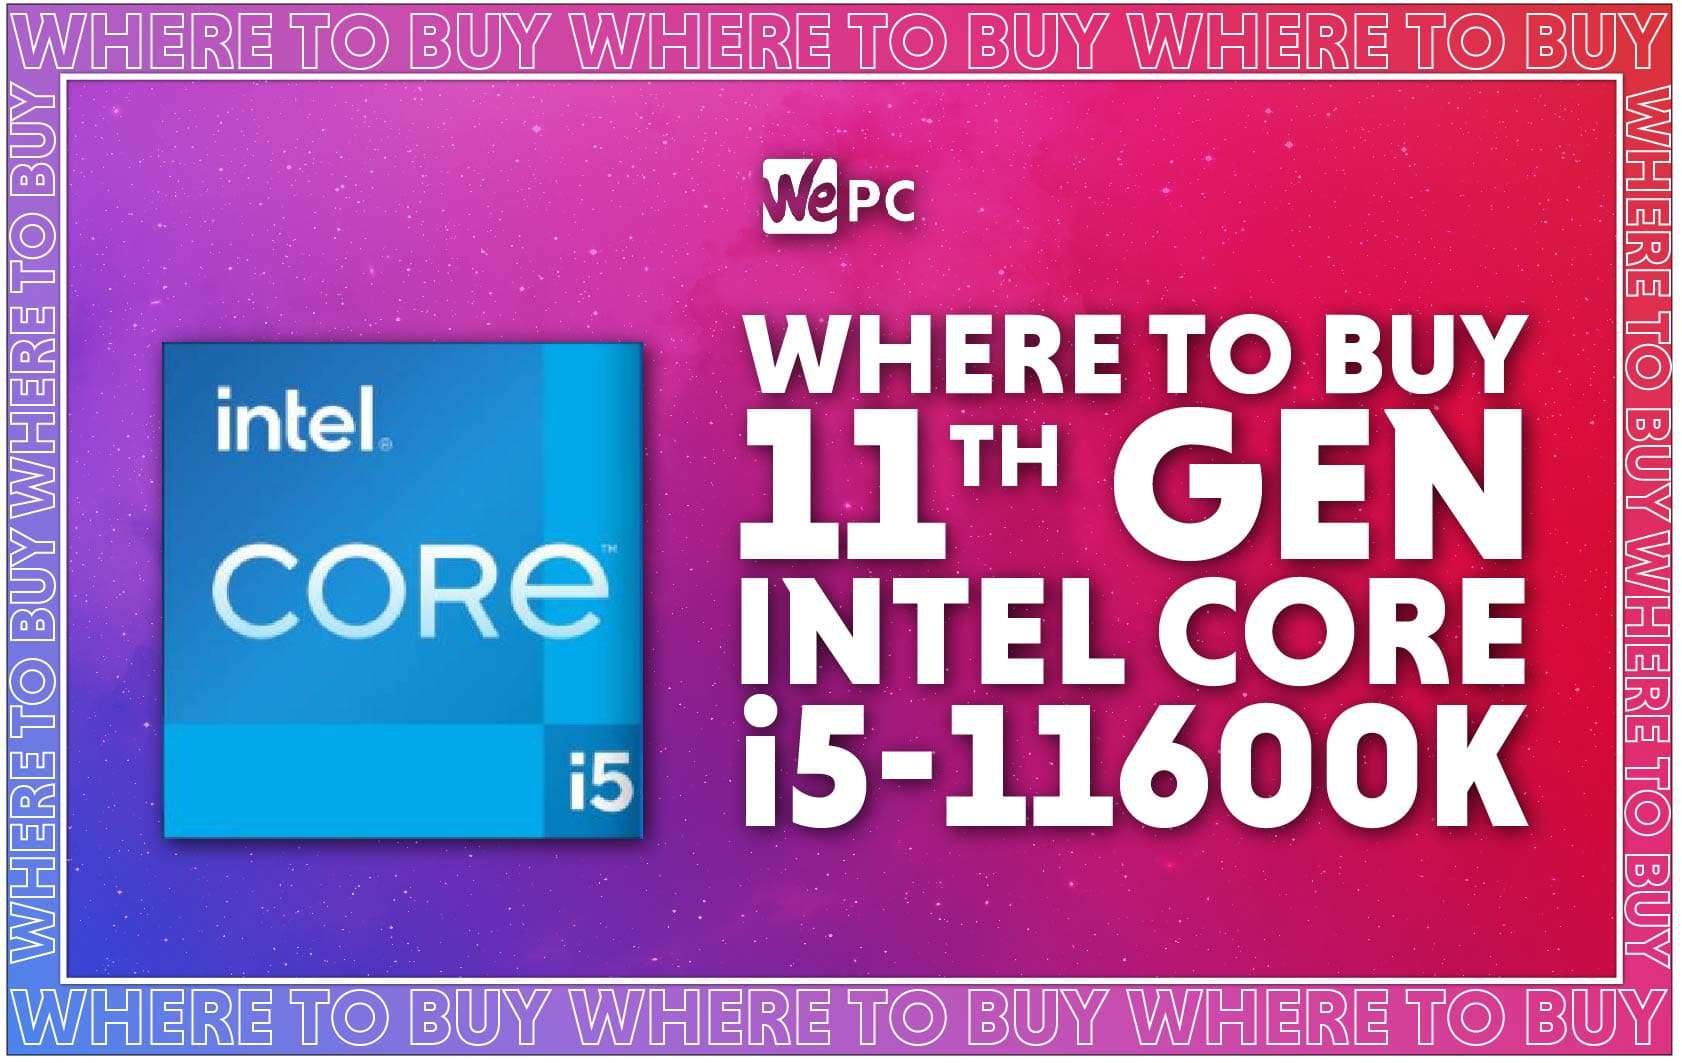 WePC Intel core 11th gen i5 11600k where to buy feature image